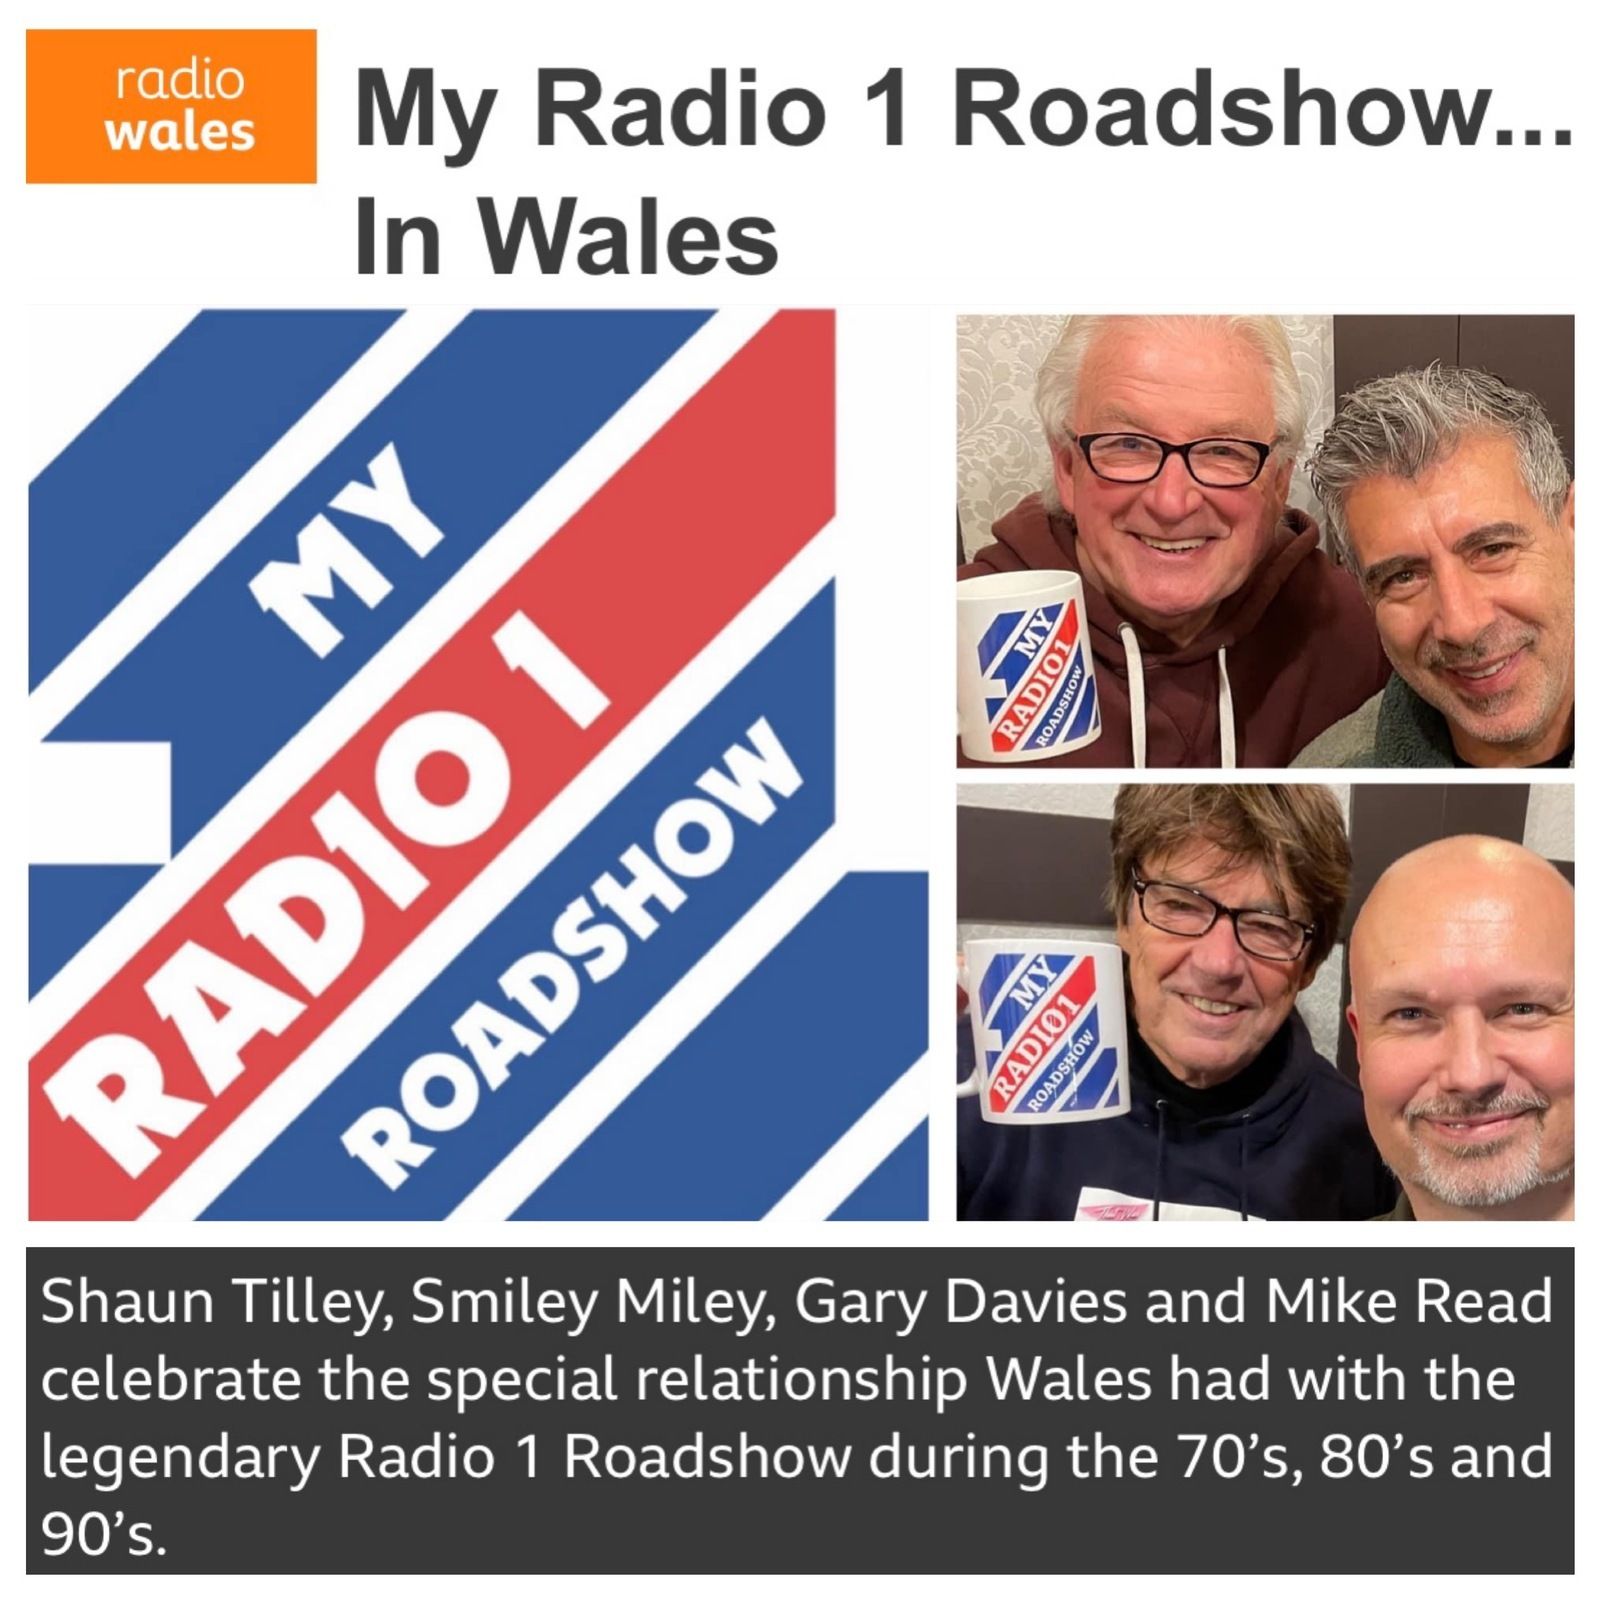 60: My Radio 1 Roadshow...In Wales With Shaun Tilley, Smiley Miley, Gary Davies and Mike Read